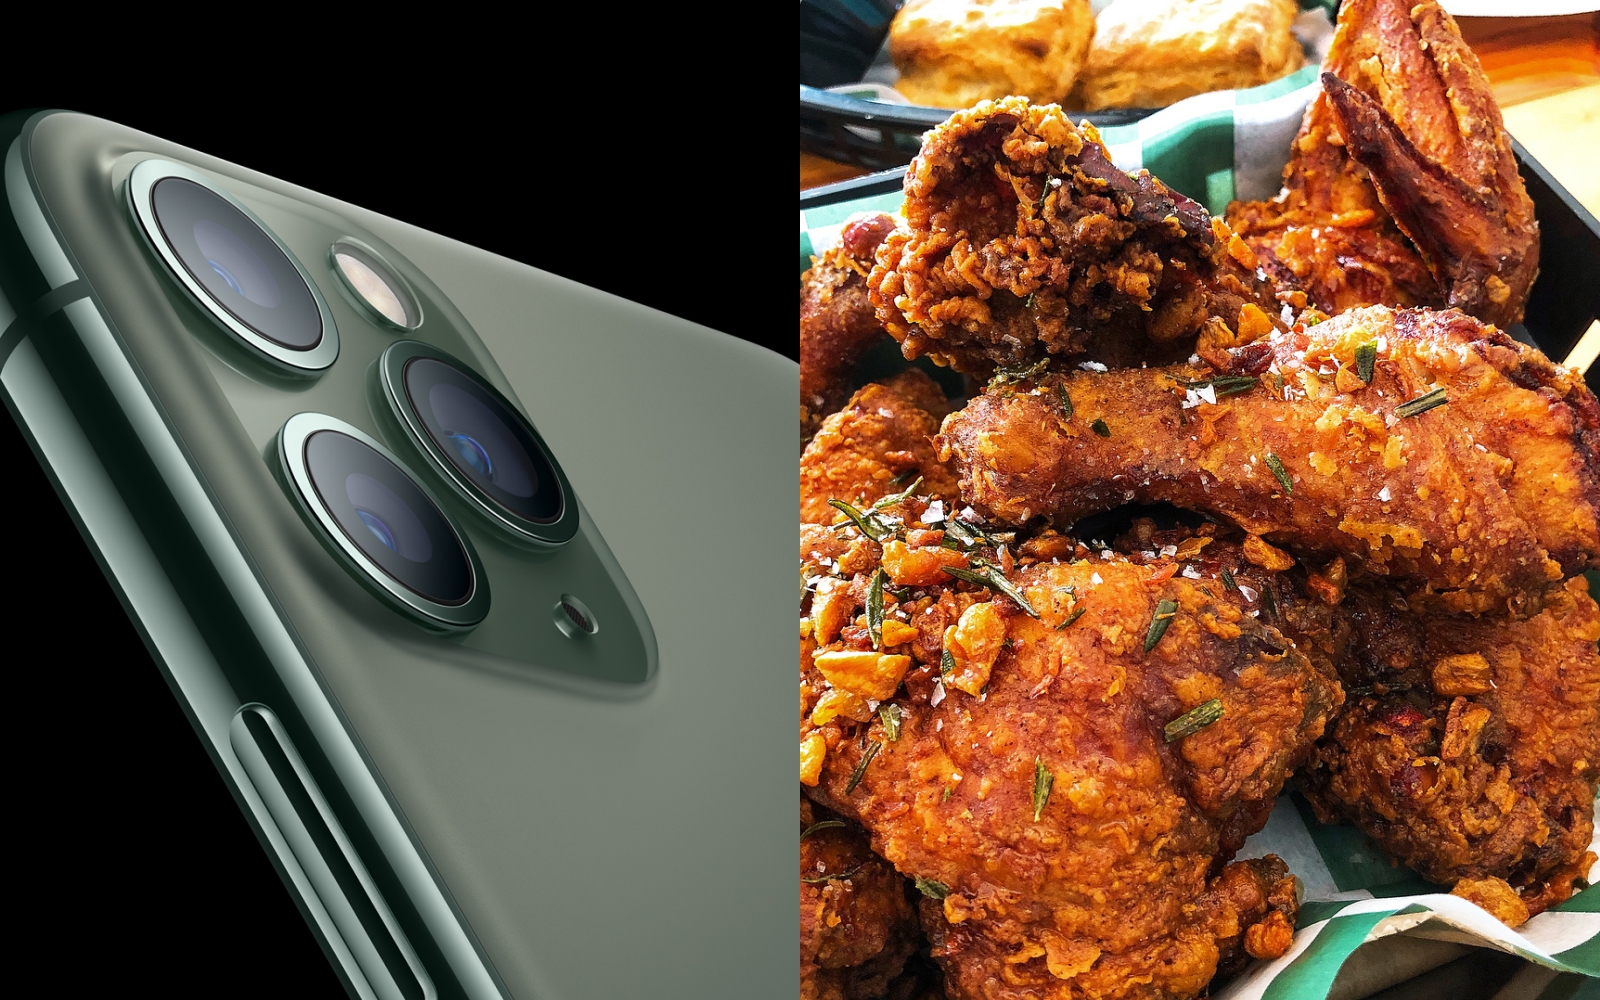 Diptych: new iPhone 11, and a close-up of fried chicken.